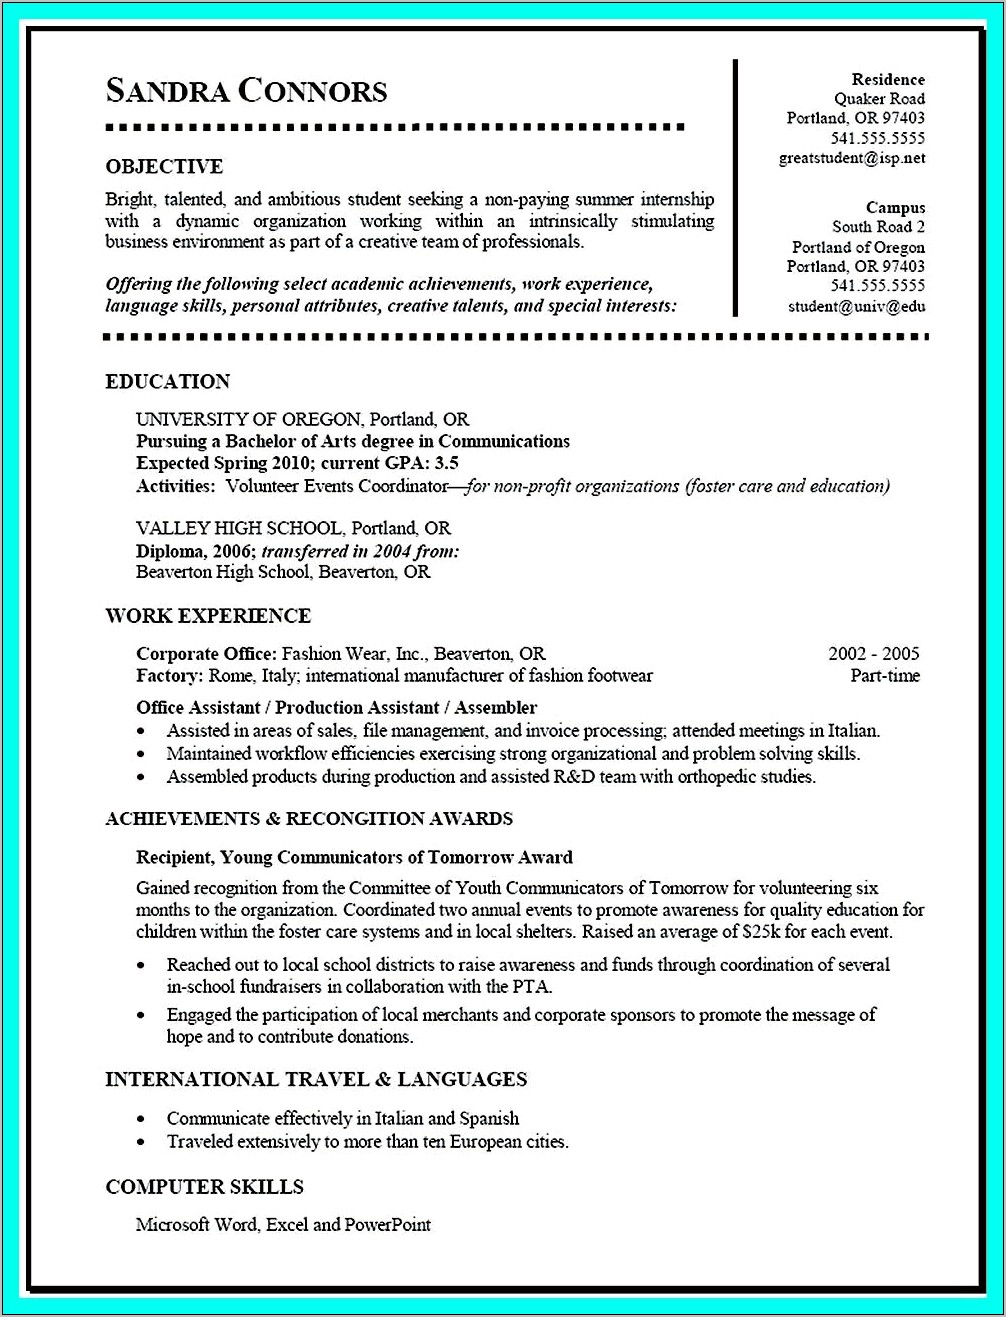 Resume For A College Graduate With Little Experience